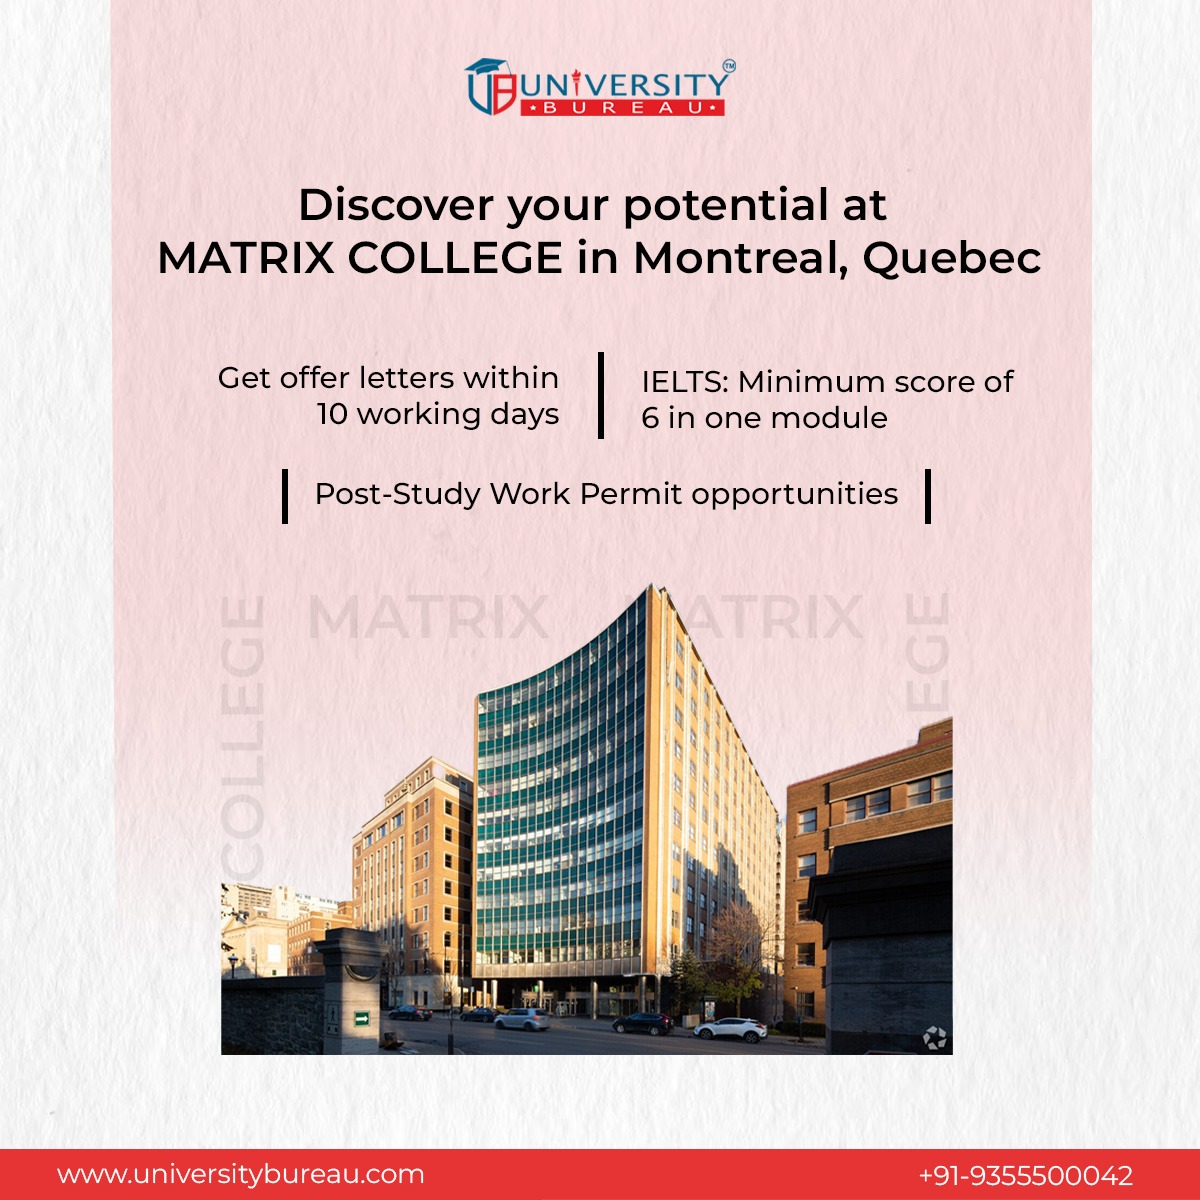 🇨🇦 Ready to start your journey❓ Apply today at University Bureau for MATRIX COLLEGE❗

#britishcolumbia #britishcolumbiarealestate #britishcolumbia #britishcolumbialife #britishcolumbiacanada #studyabroad #studygram #studyabroad #studygram #studyincanada #PAKvsNED